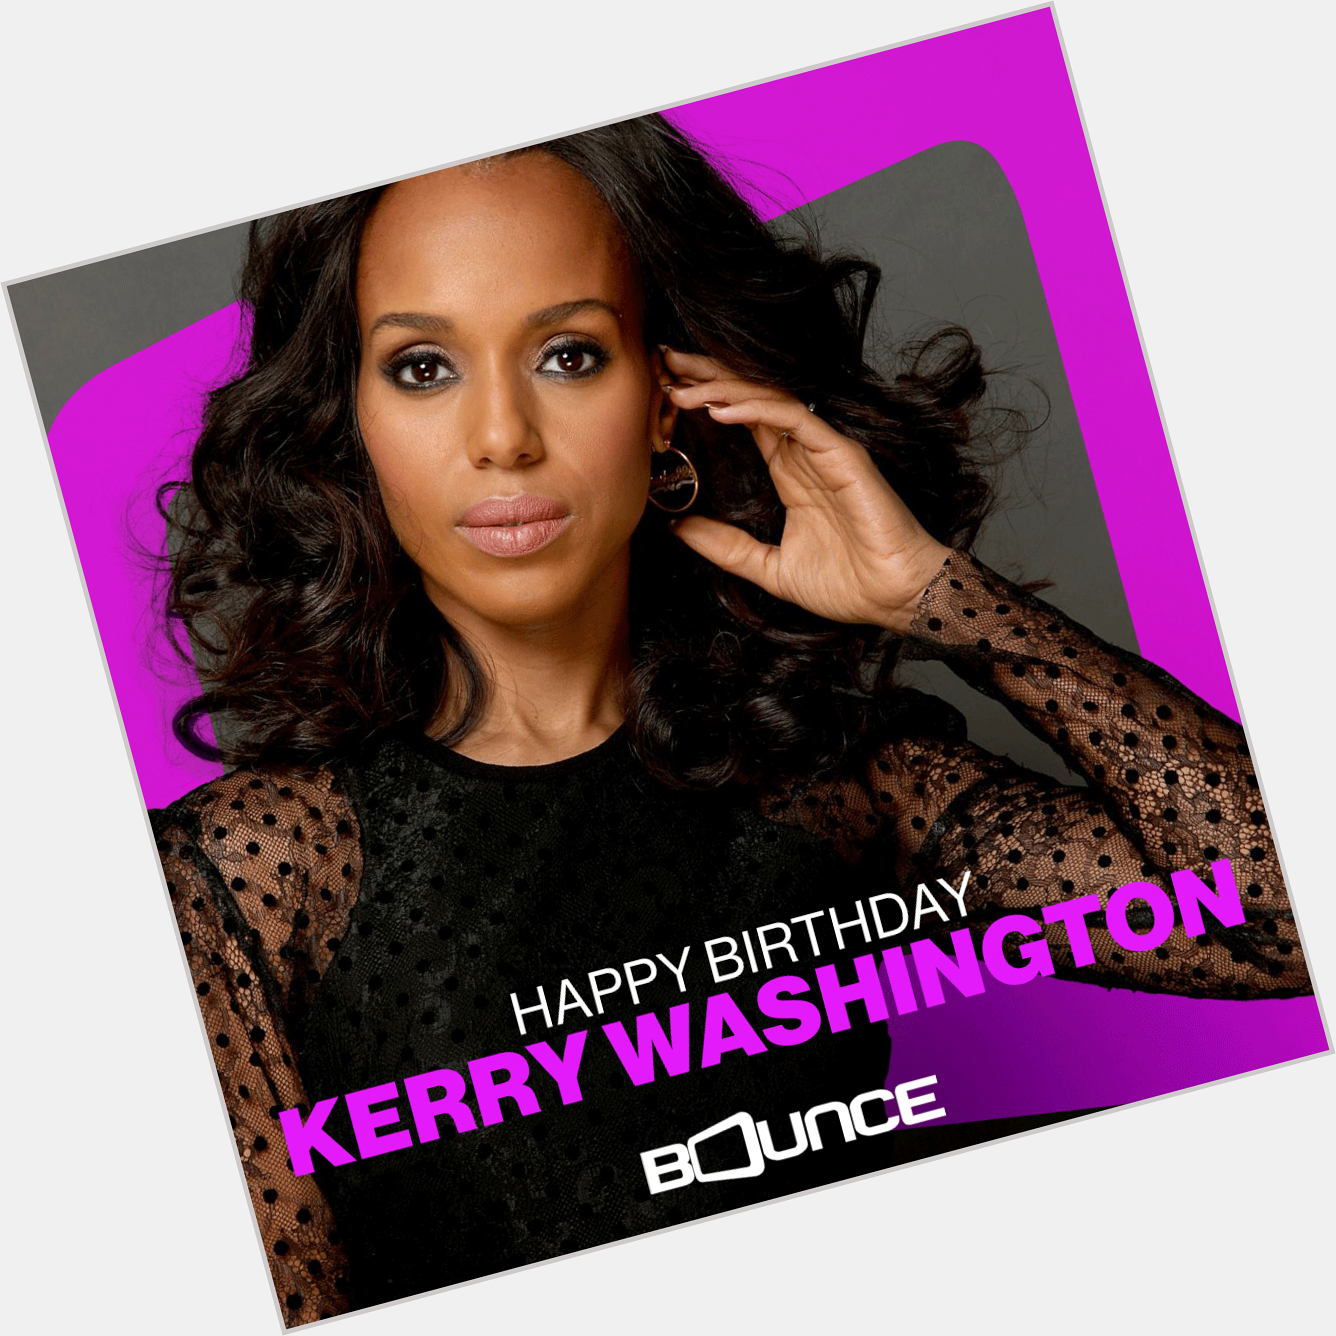 Happy Birthday to THE talented What\s your favorite movie or show starring Kerry Washington? 